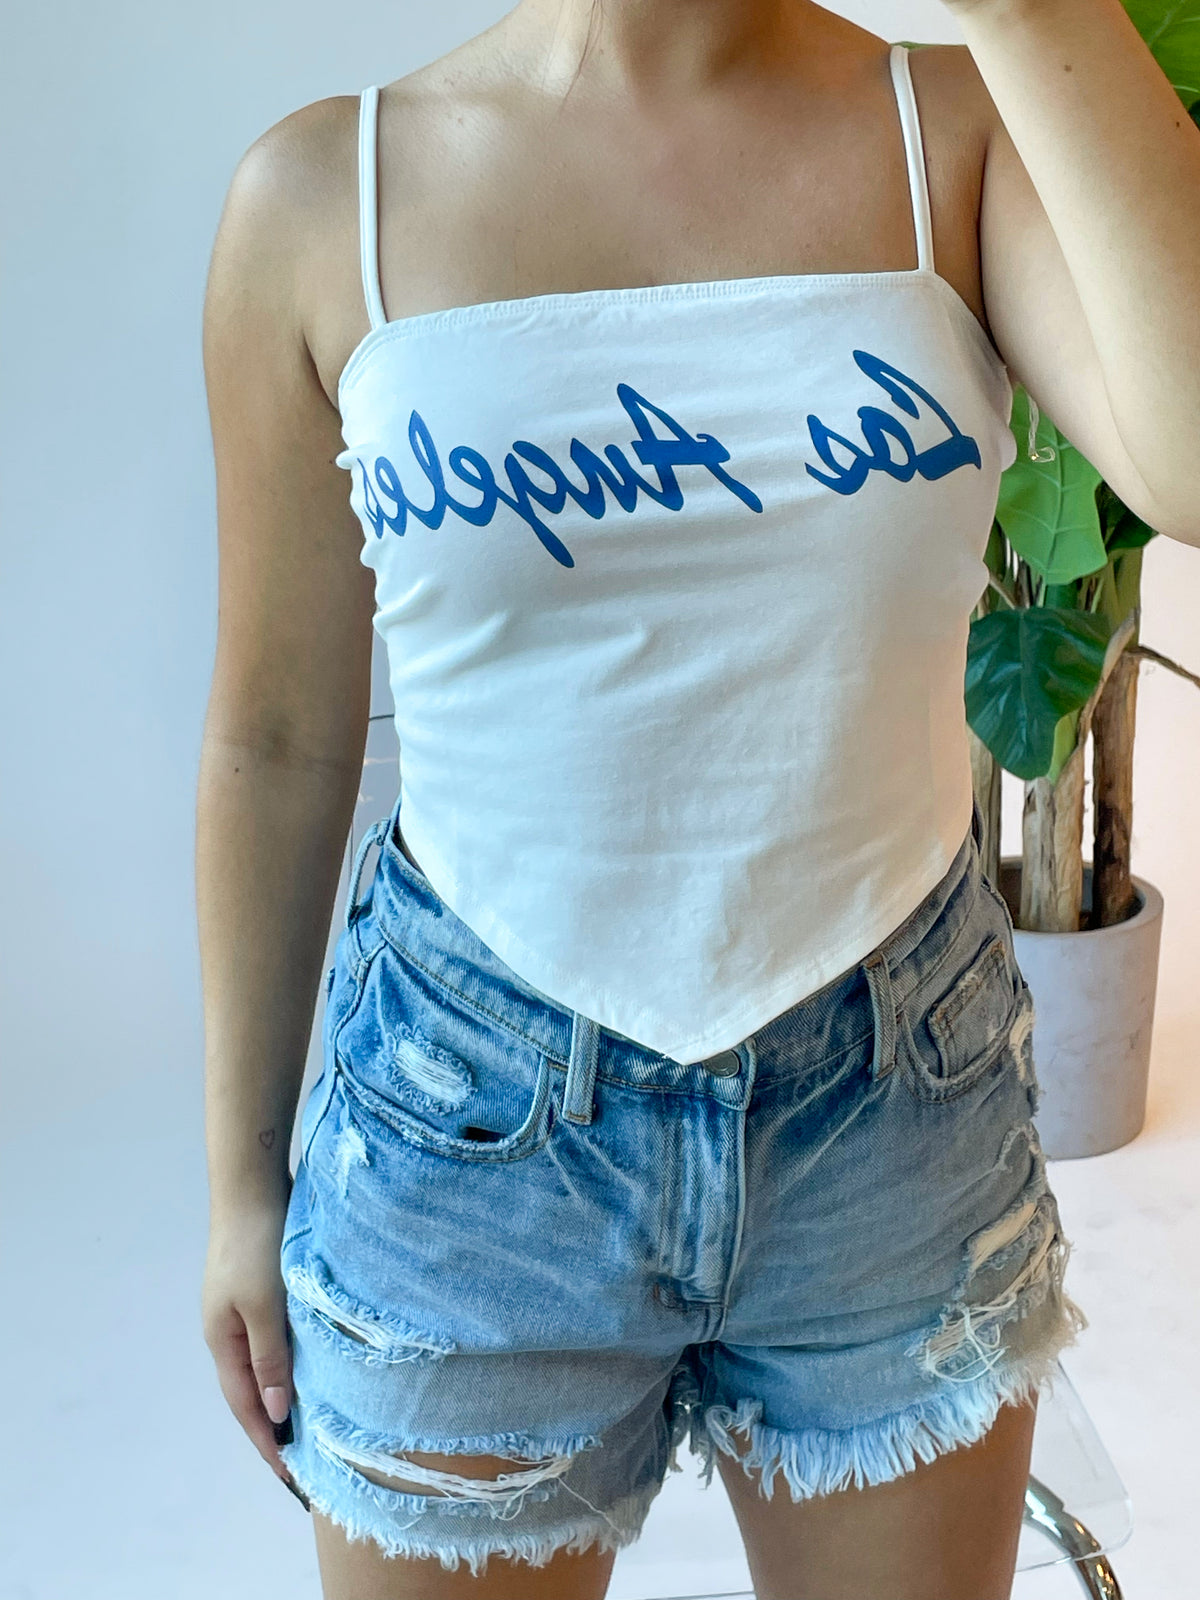 ivory los angeles top, blue font, spaghetti strap, adjustable straps, self tie back, triangle cut out